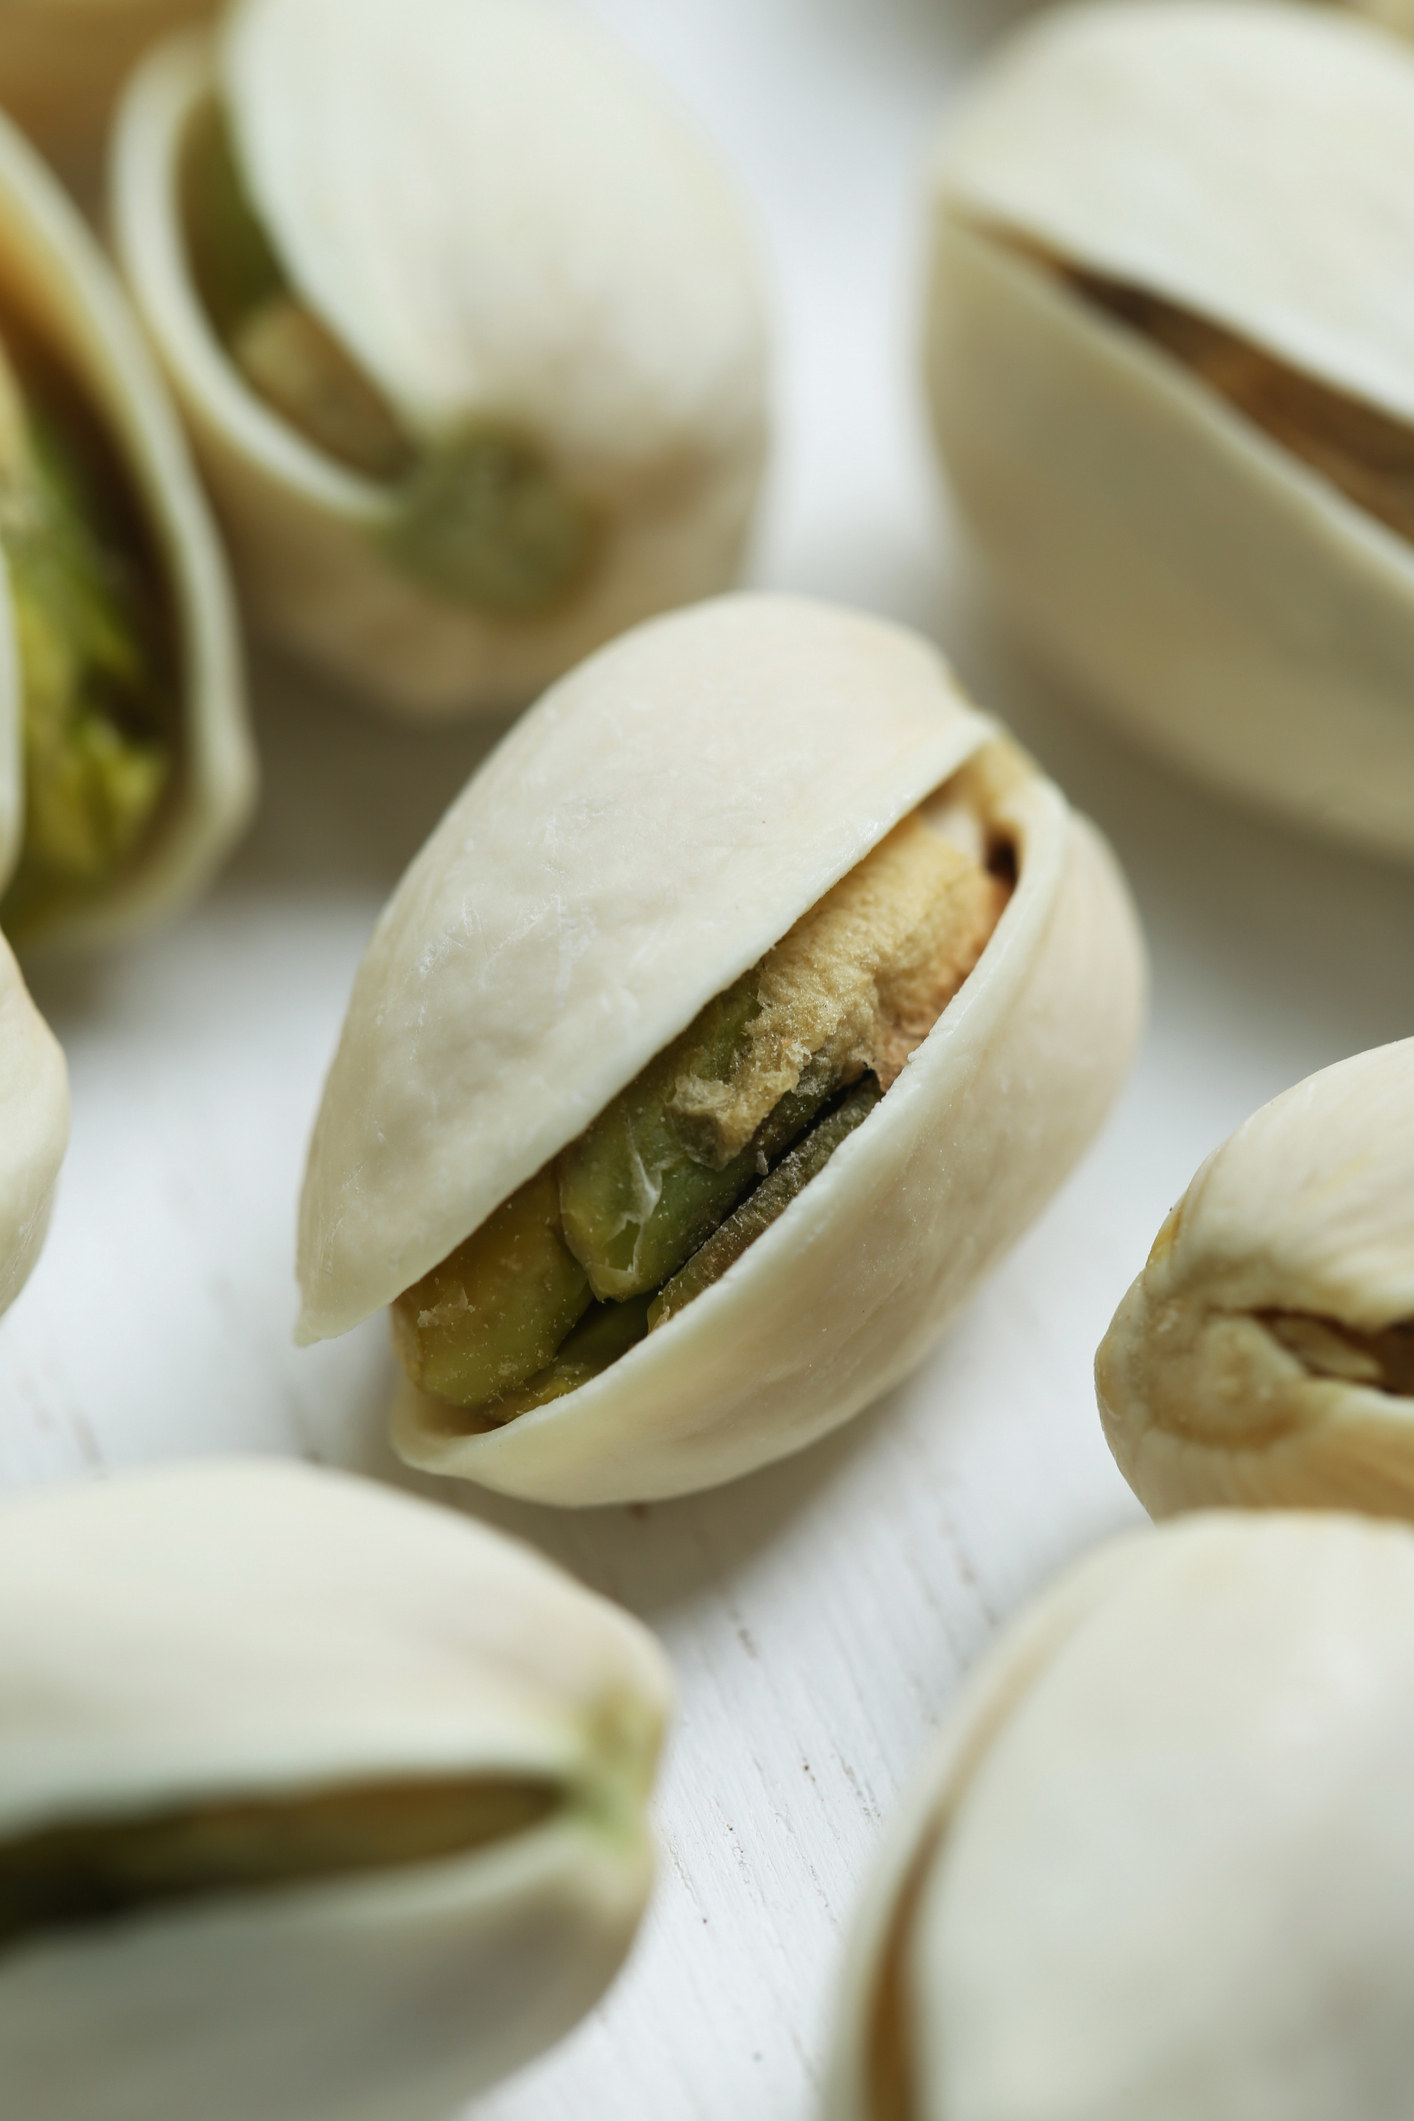 Pistachios in their shells.